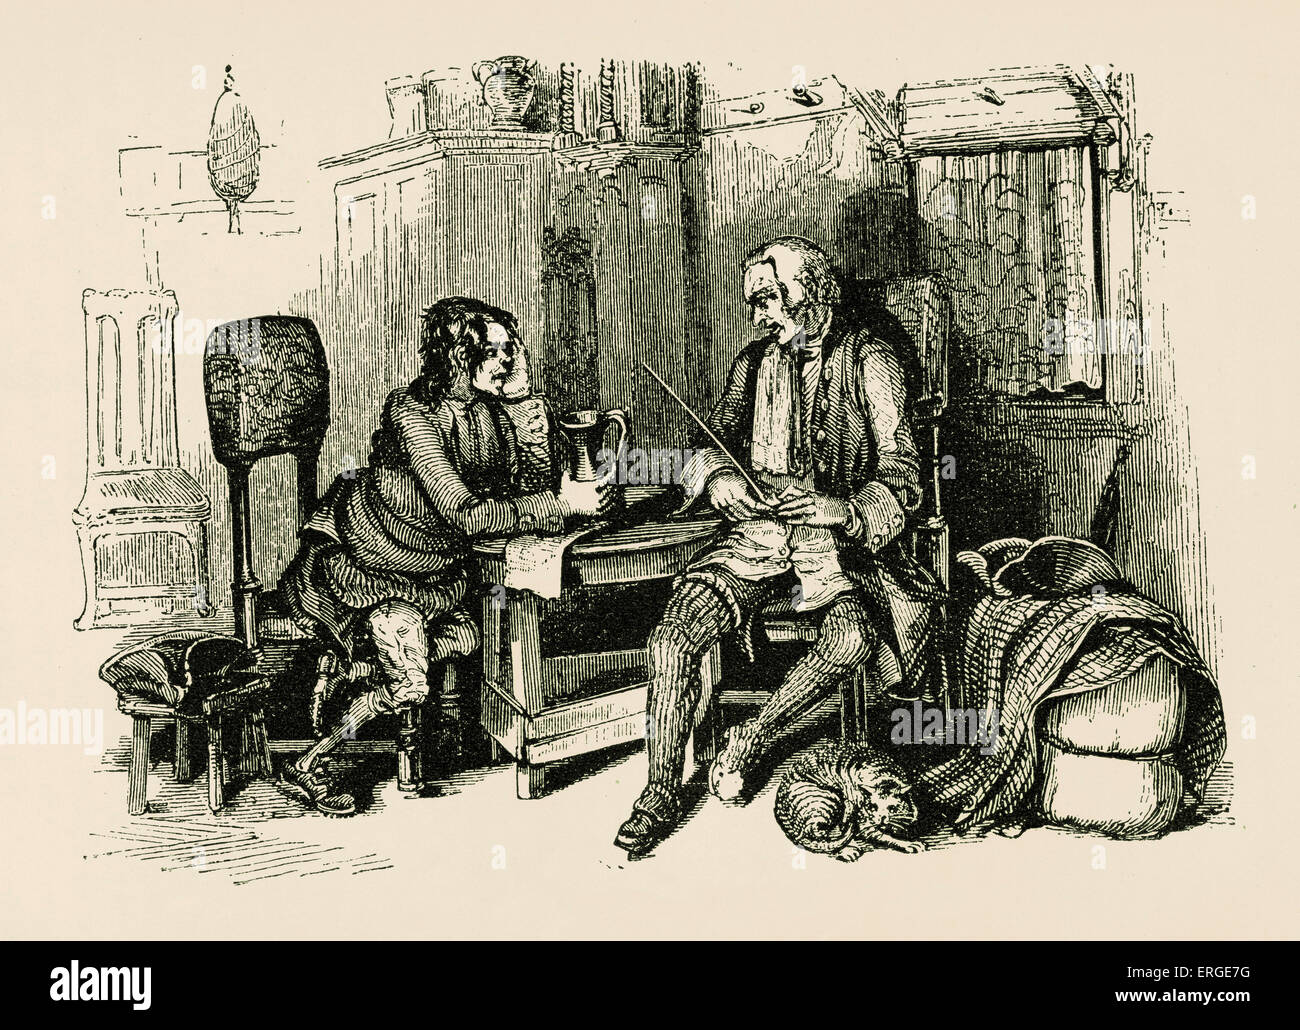 Rob Roy  by Sir Walter Scott. First published 1817.  Caption: Andrew Fairservice and the Pedlar.  RR: Robert Roy MacGregor, Stock Photo